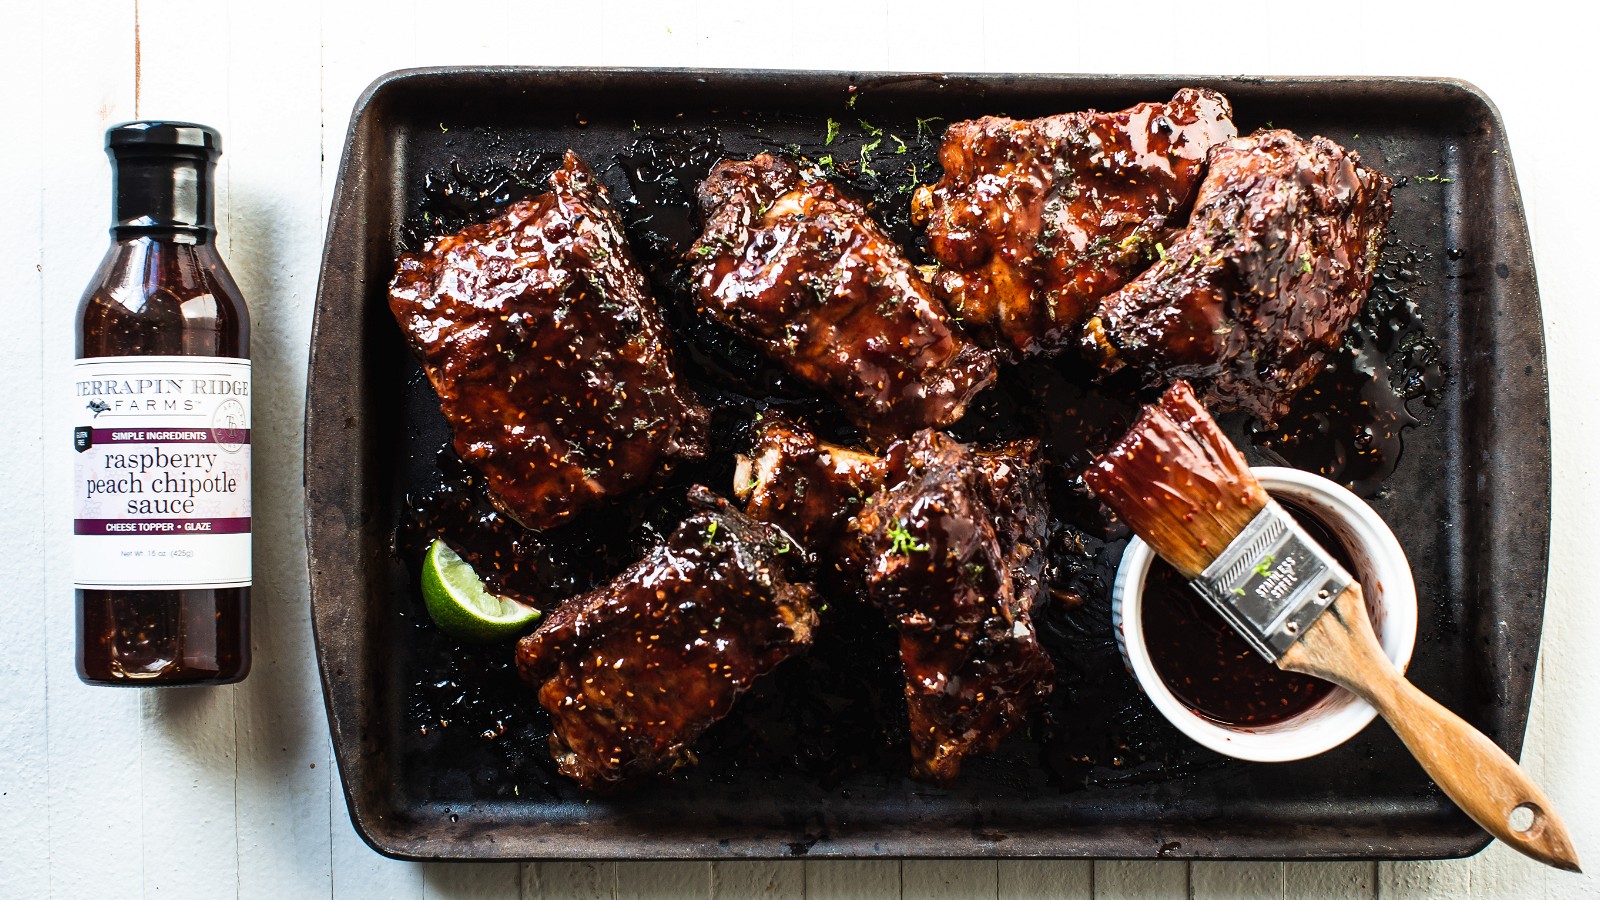 Image of Baby Back Ribs with Raspberry Peach Chipotle Sauce